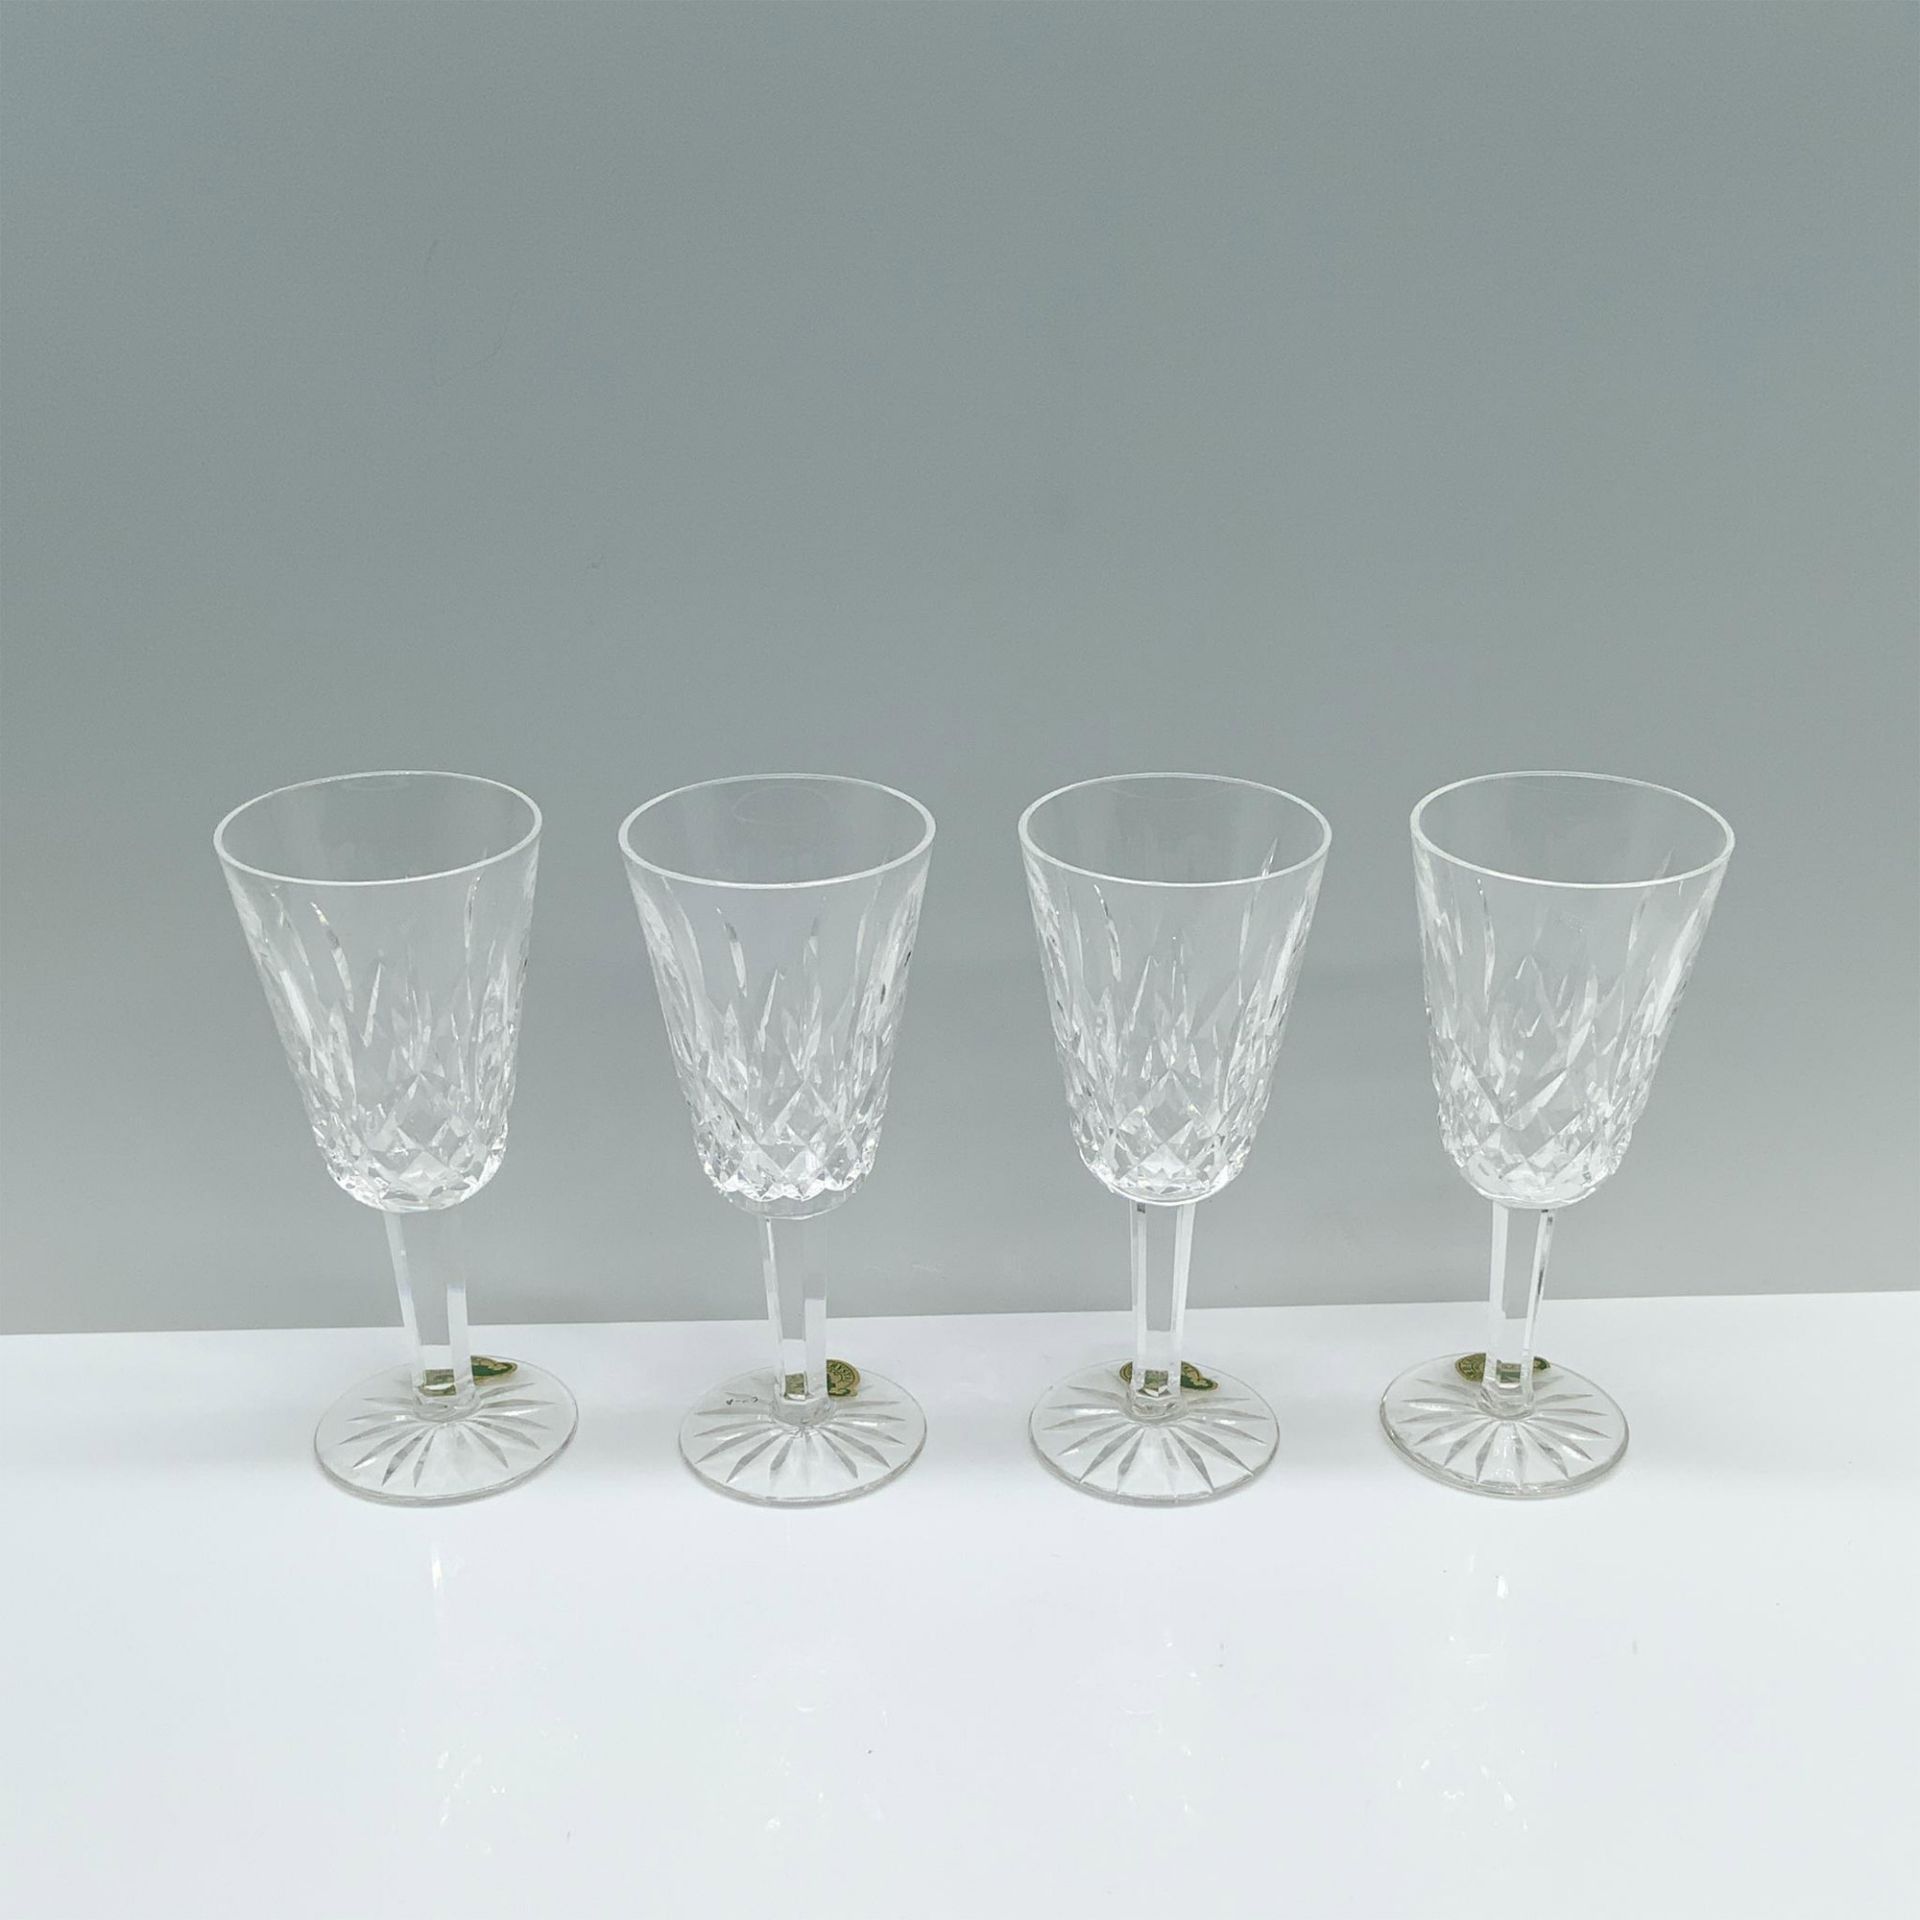 4pc Waterford Crystal Sherry Glass, Lismore - Image 2 of 4